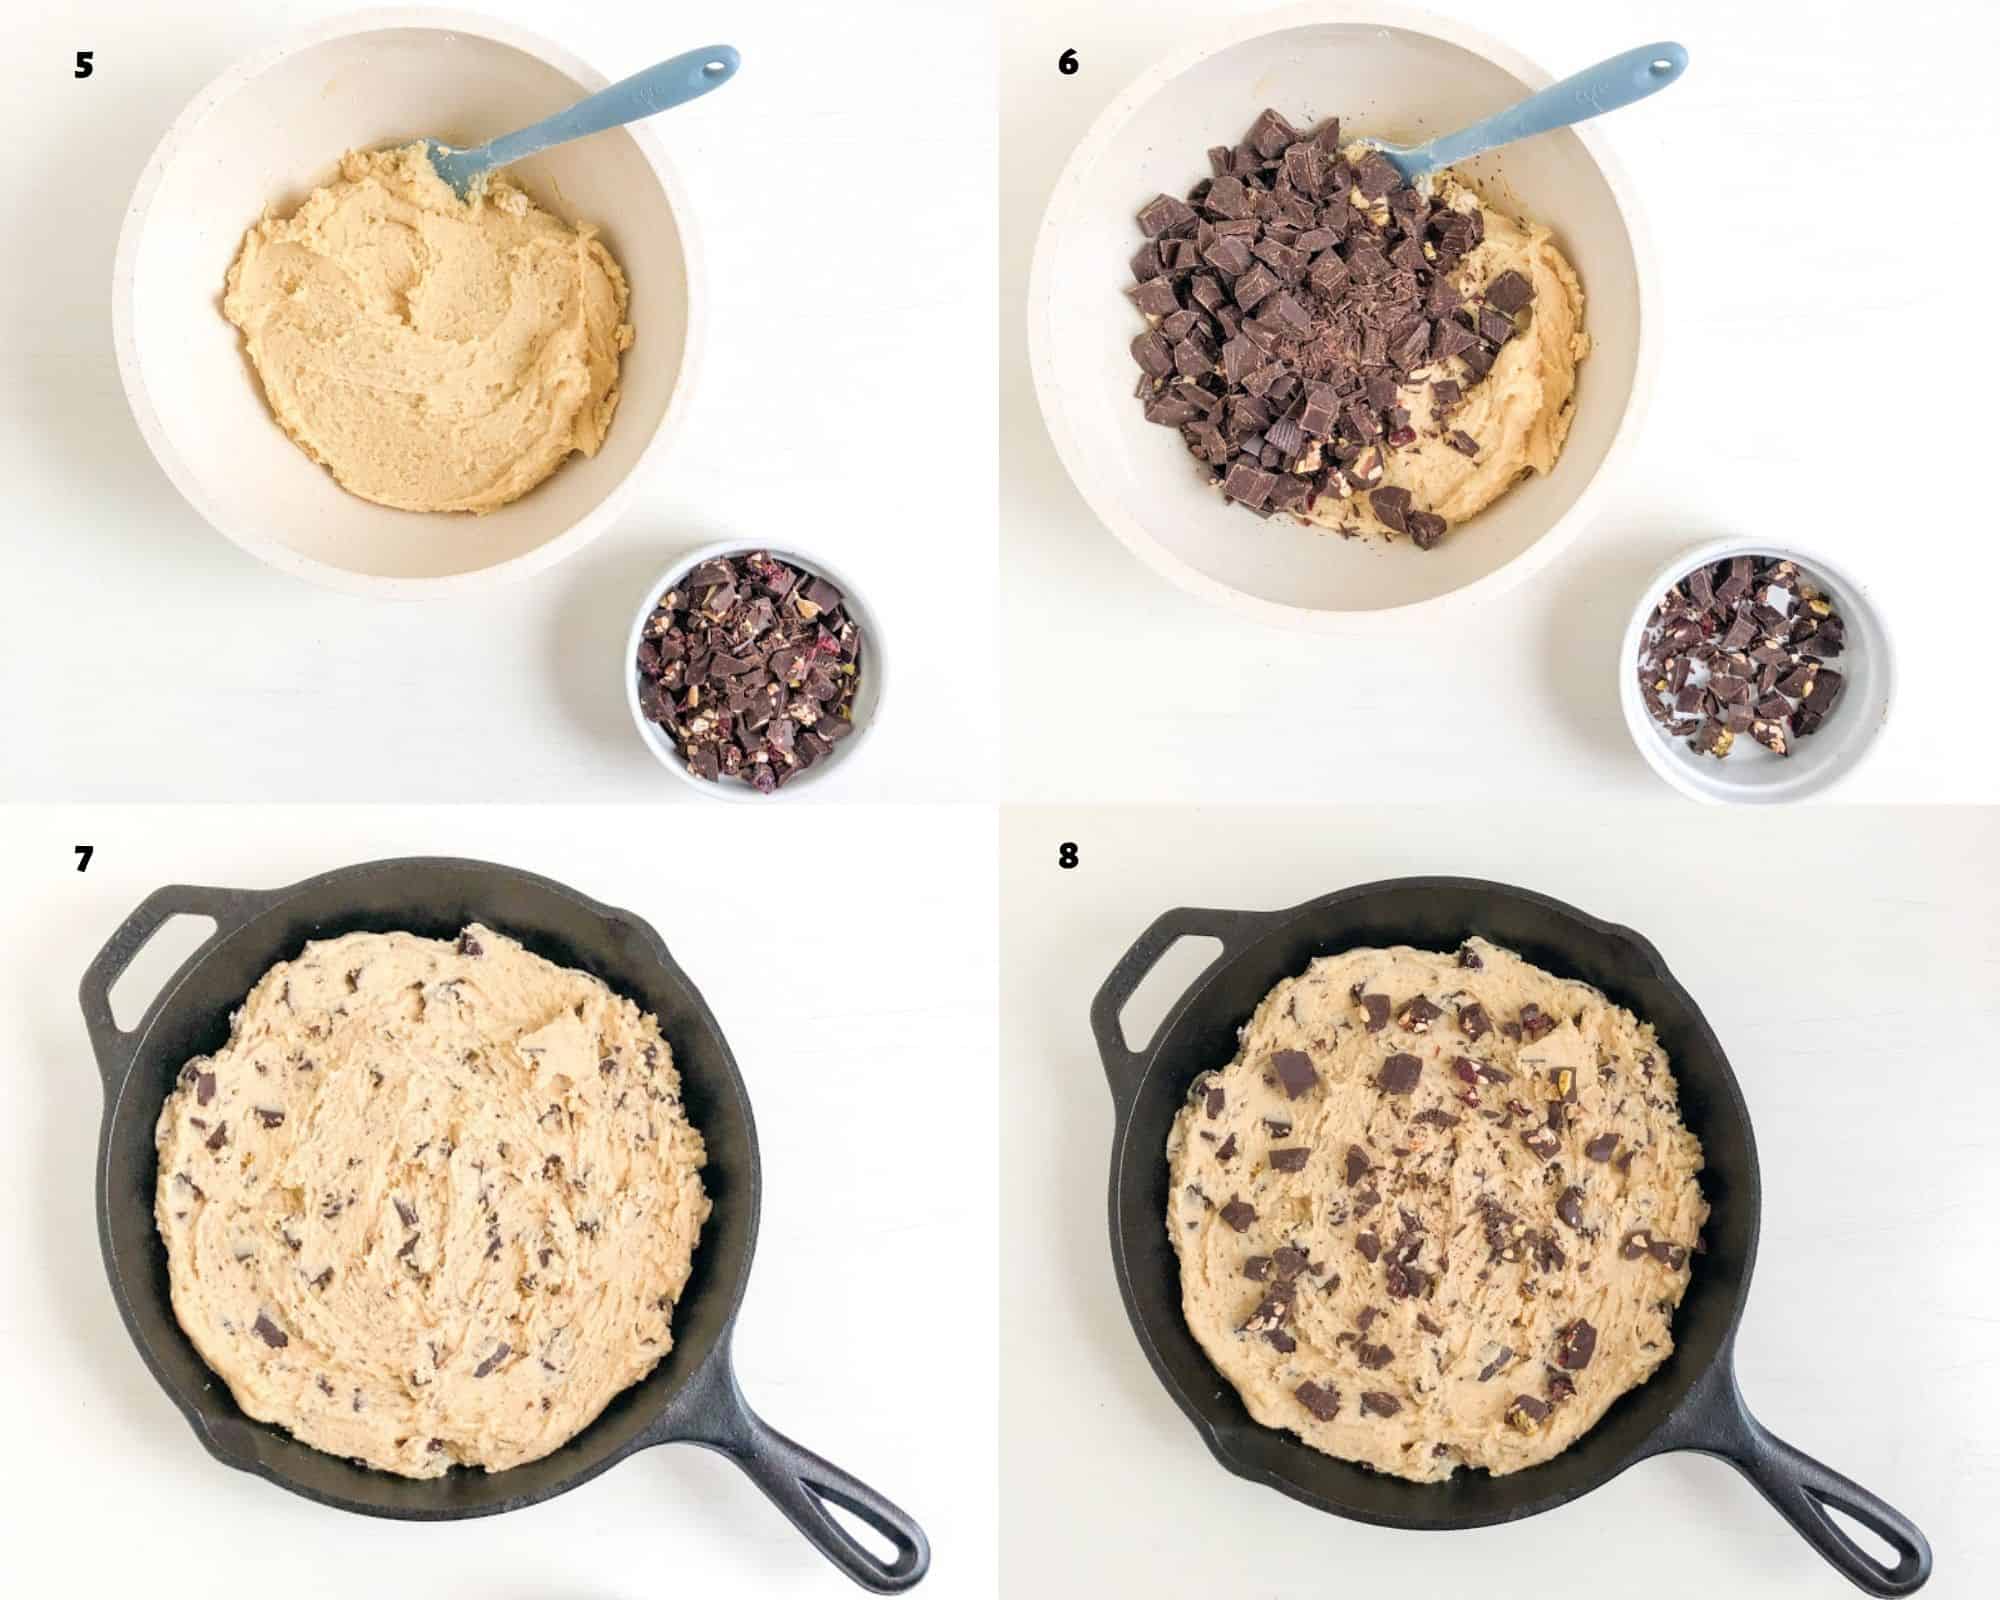 https://amysdeliciousmess.com/wp-content/uploads/2020/09/Chocolate-Chunk-Skillet-Cookie-2.jpg